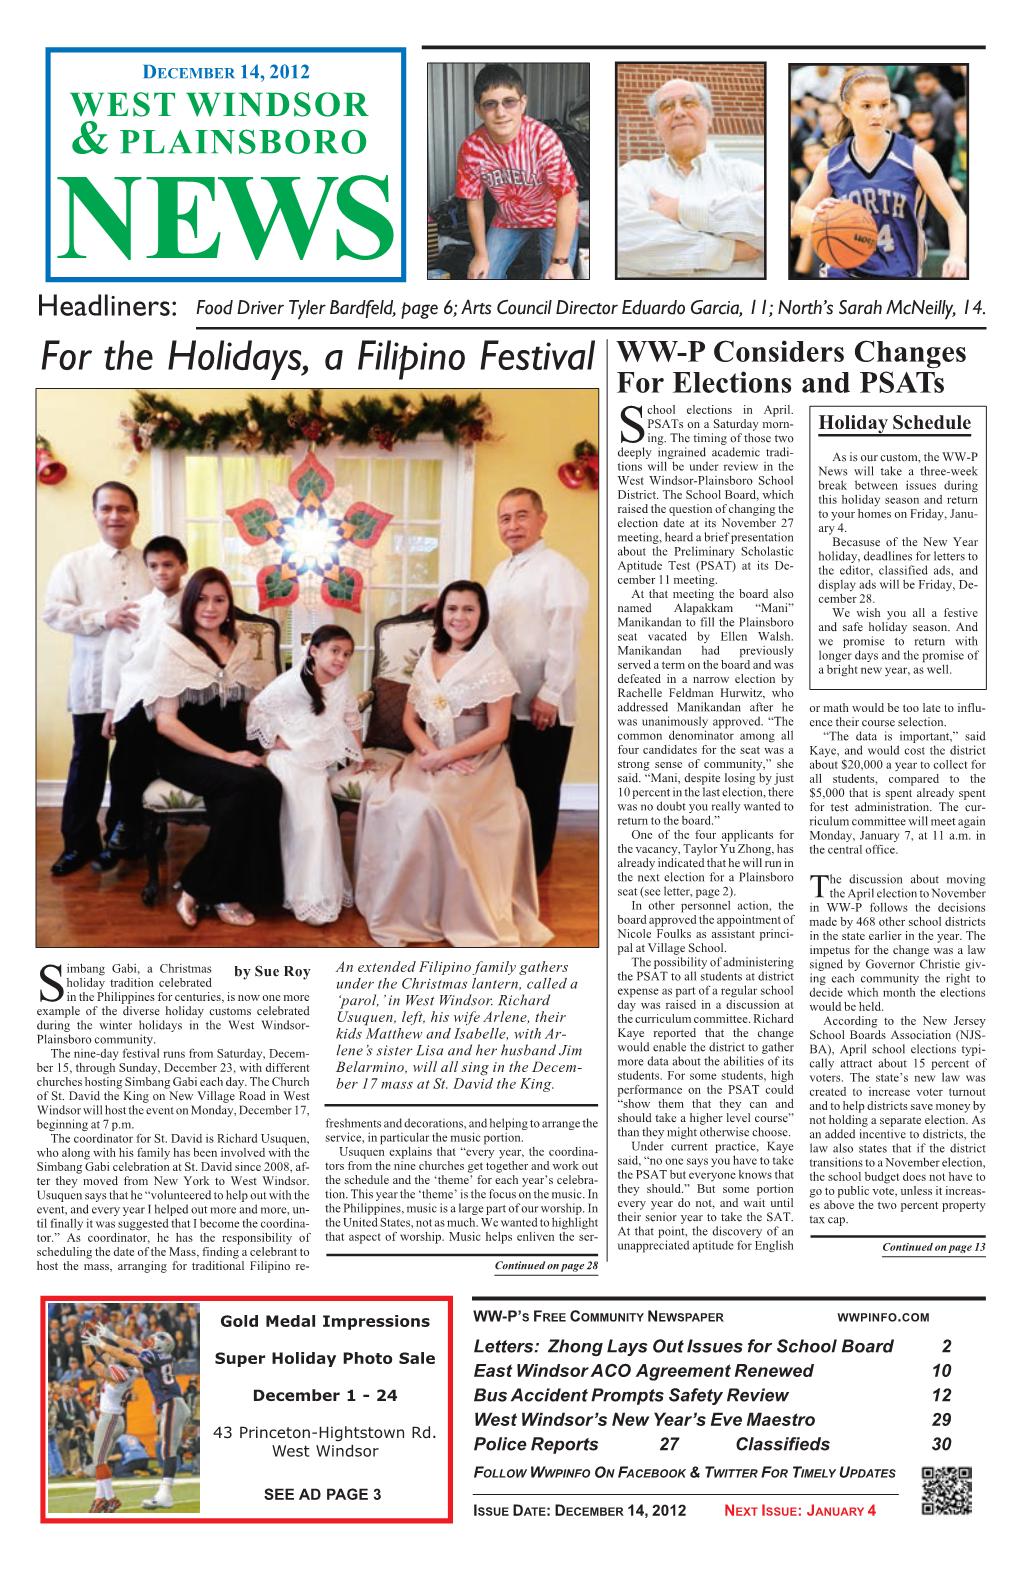 For the Holidays, a Filipino Festival WW-P Considers Changes for Elections and Psats Chool Elections in April